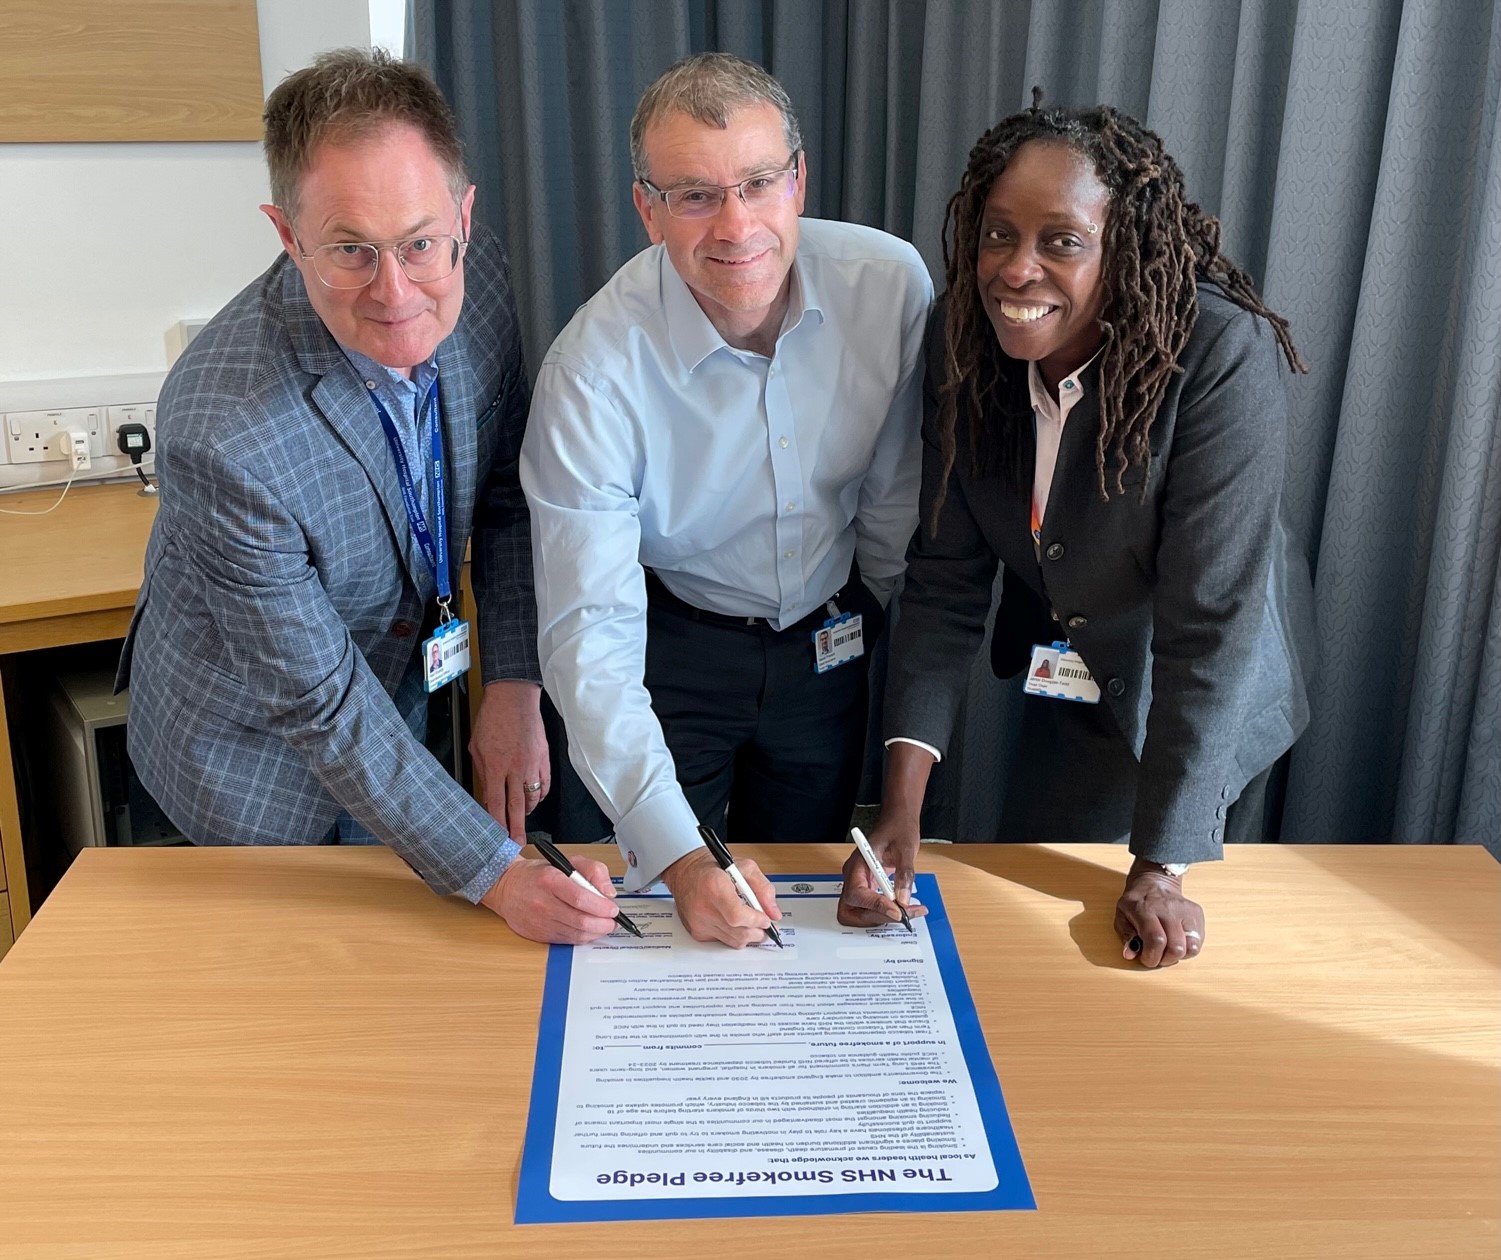 Chief medical officer Paul Grundy, chief executive David French and UHS chair Jenni Douglas-Todd signing the smoke-free pledge